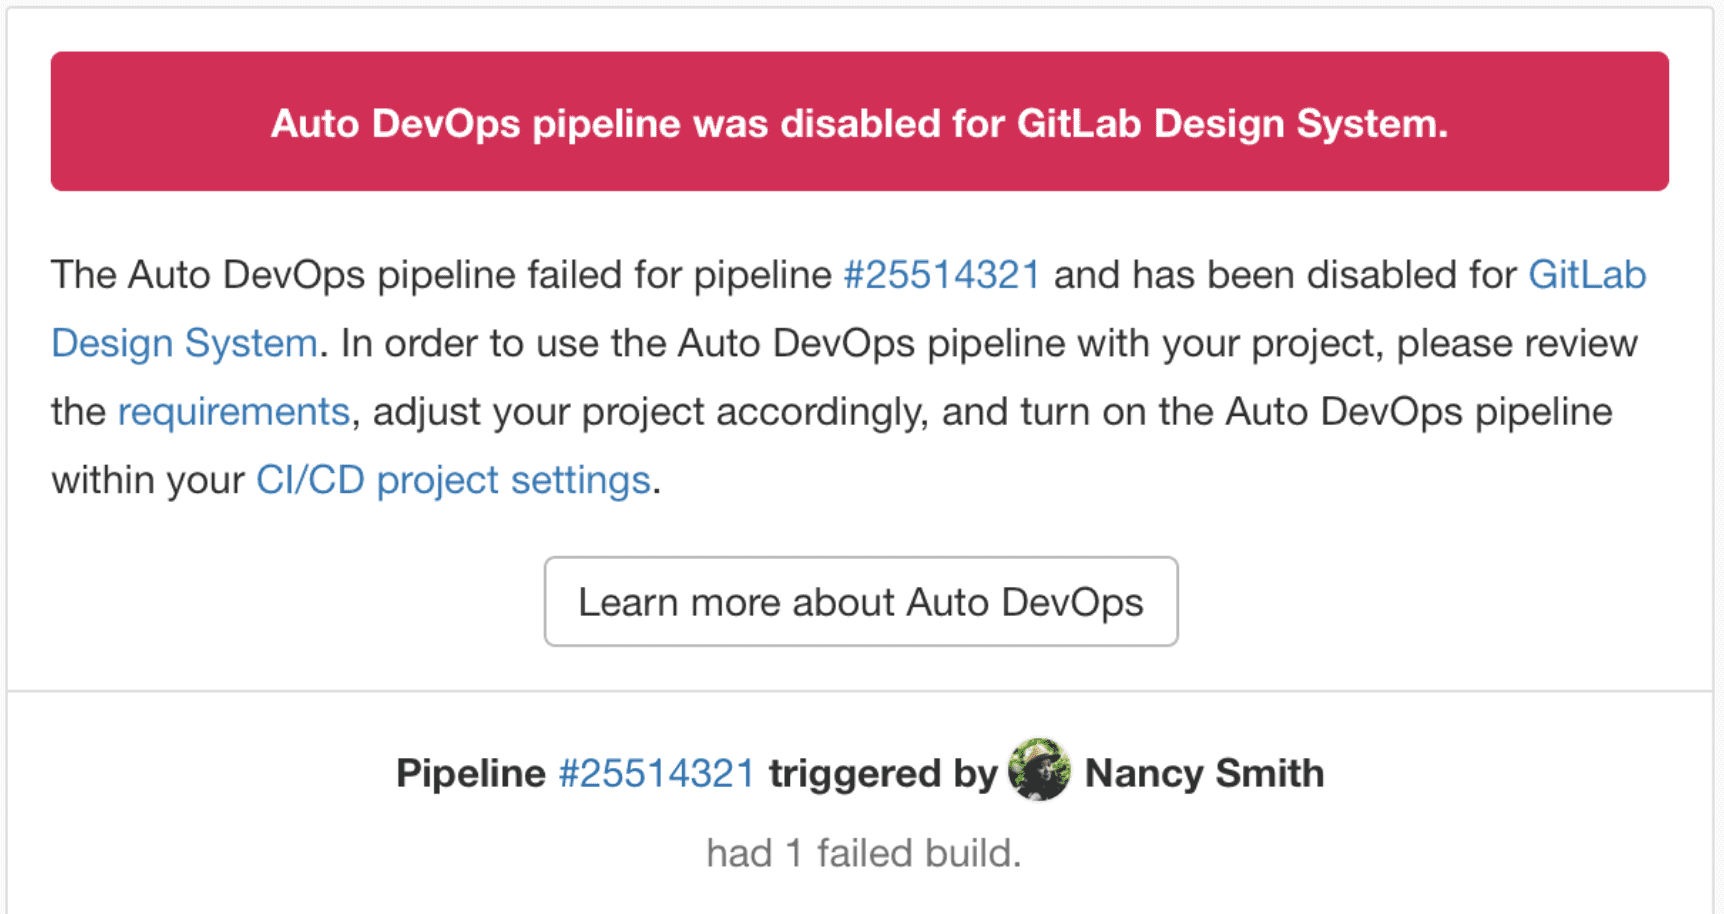 Automatically disable Auto DevOps for project upon first pipeline failure